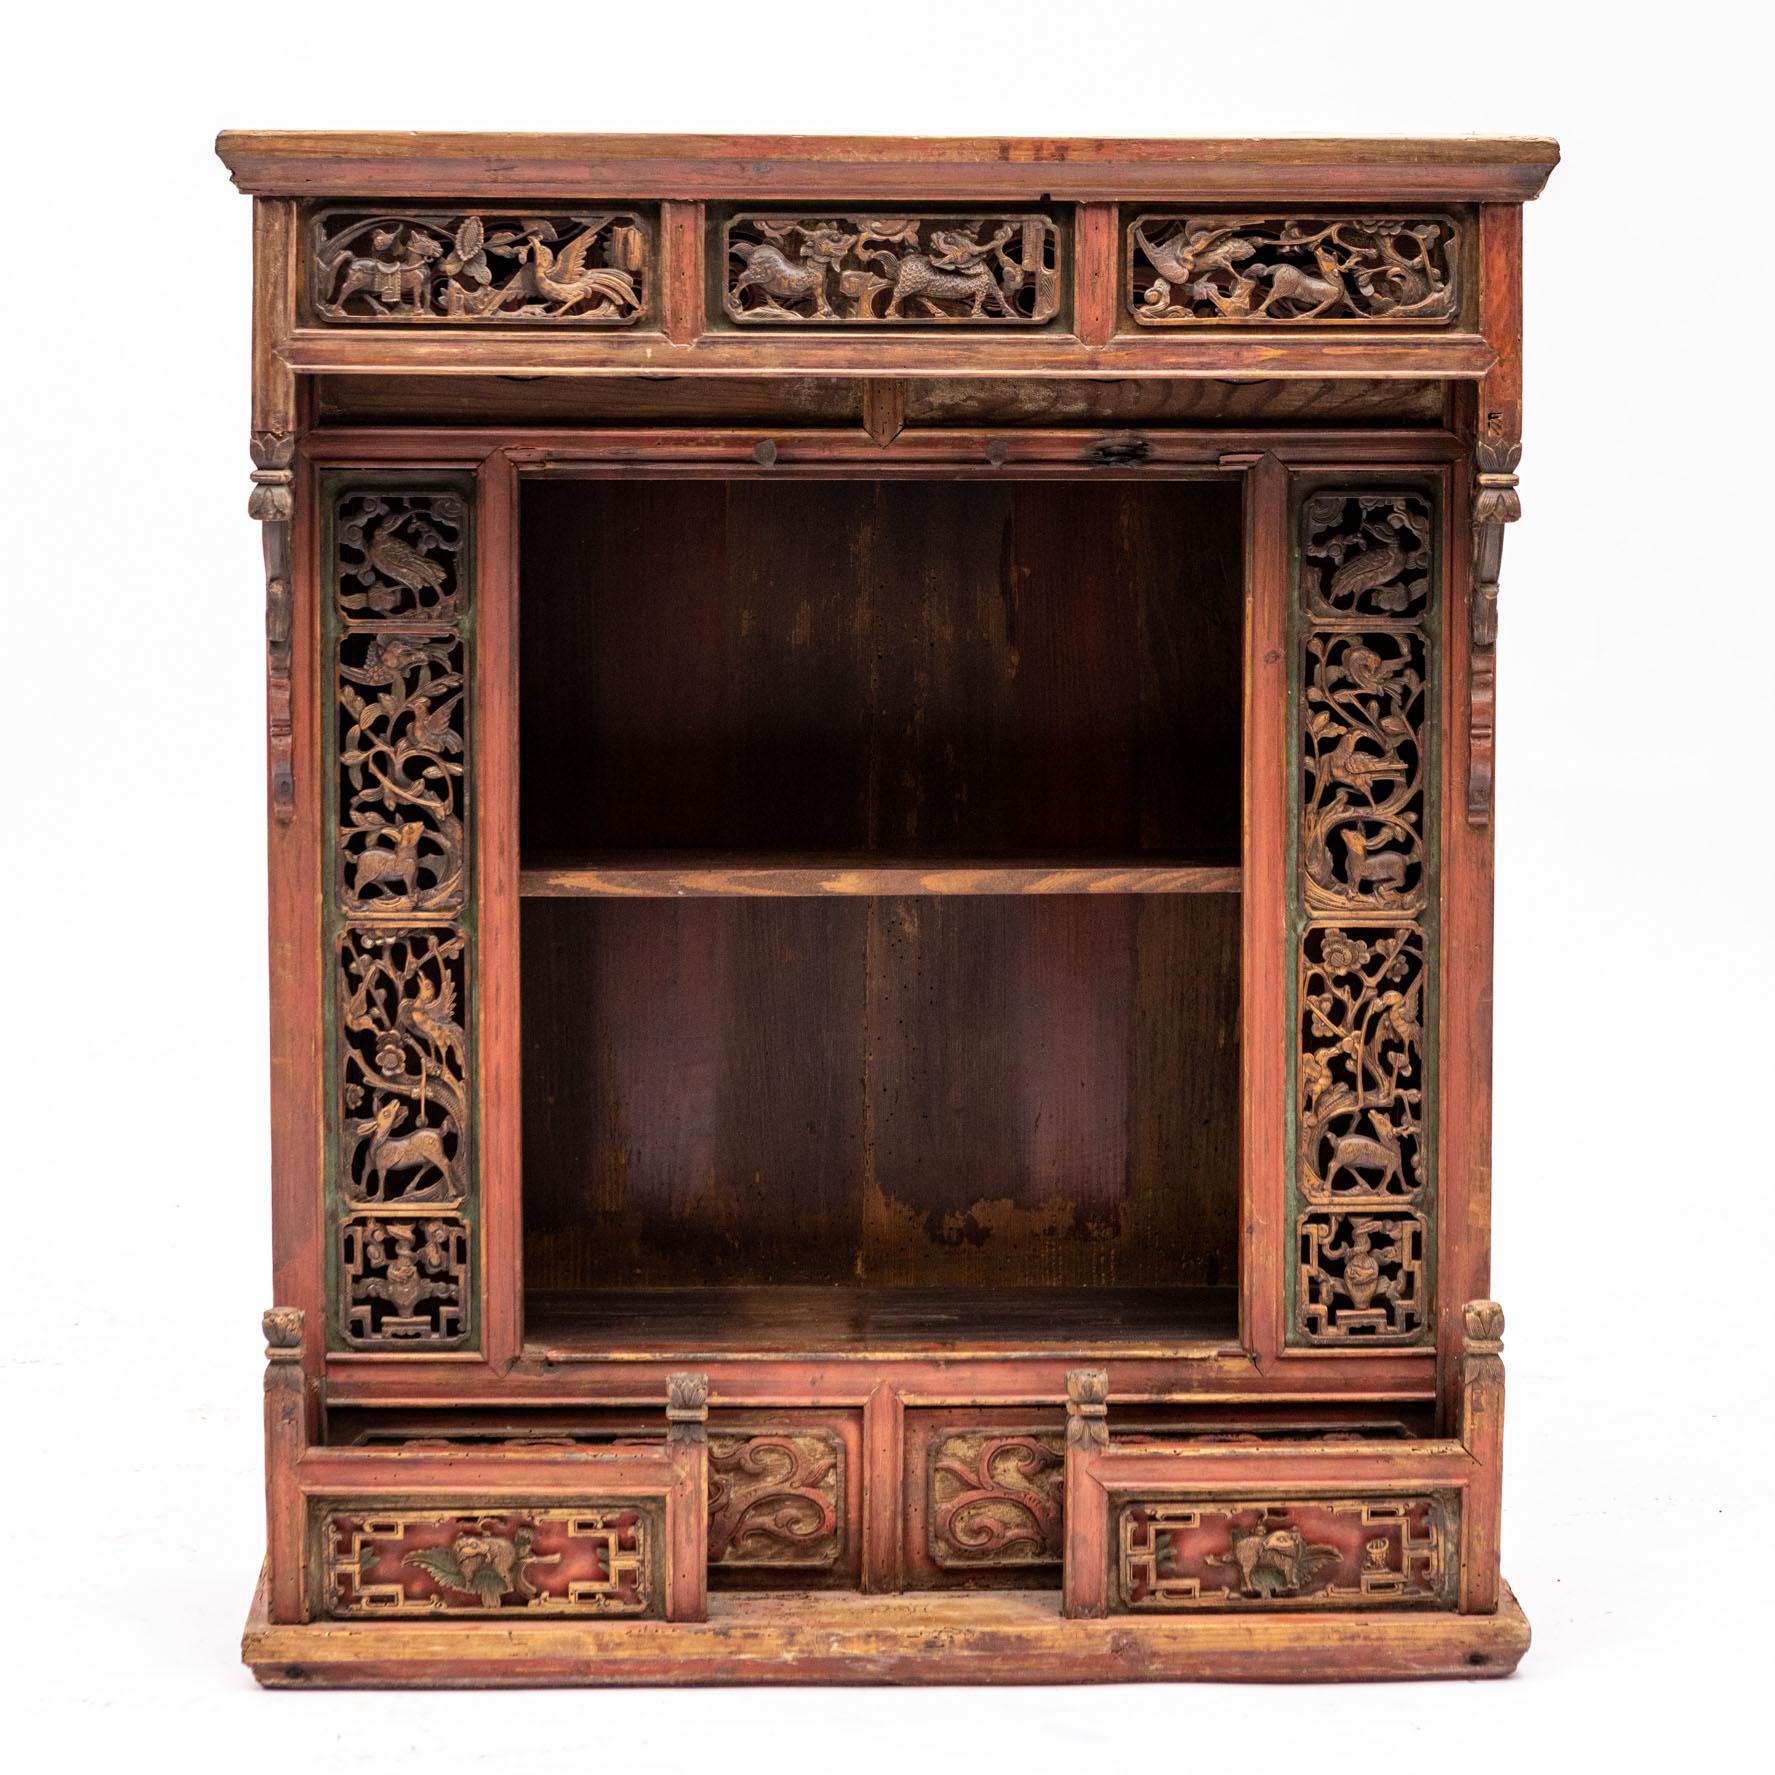 Rare Buddhist alter shrine, made in pine wood.
Rich on carved figural sceneries.
Original polychrome lacquer, beautiful and untouched condition.

From Shanxi Province in China.